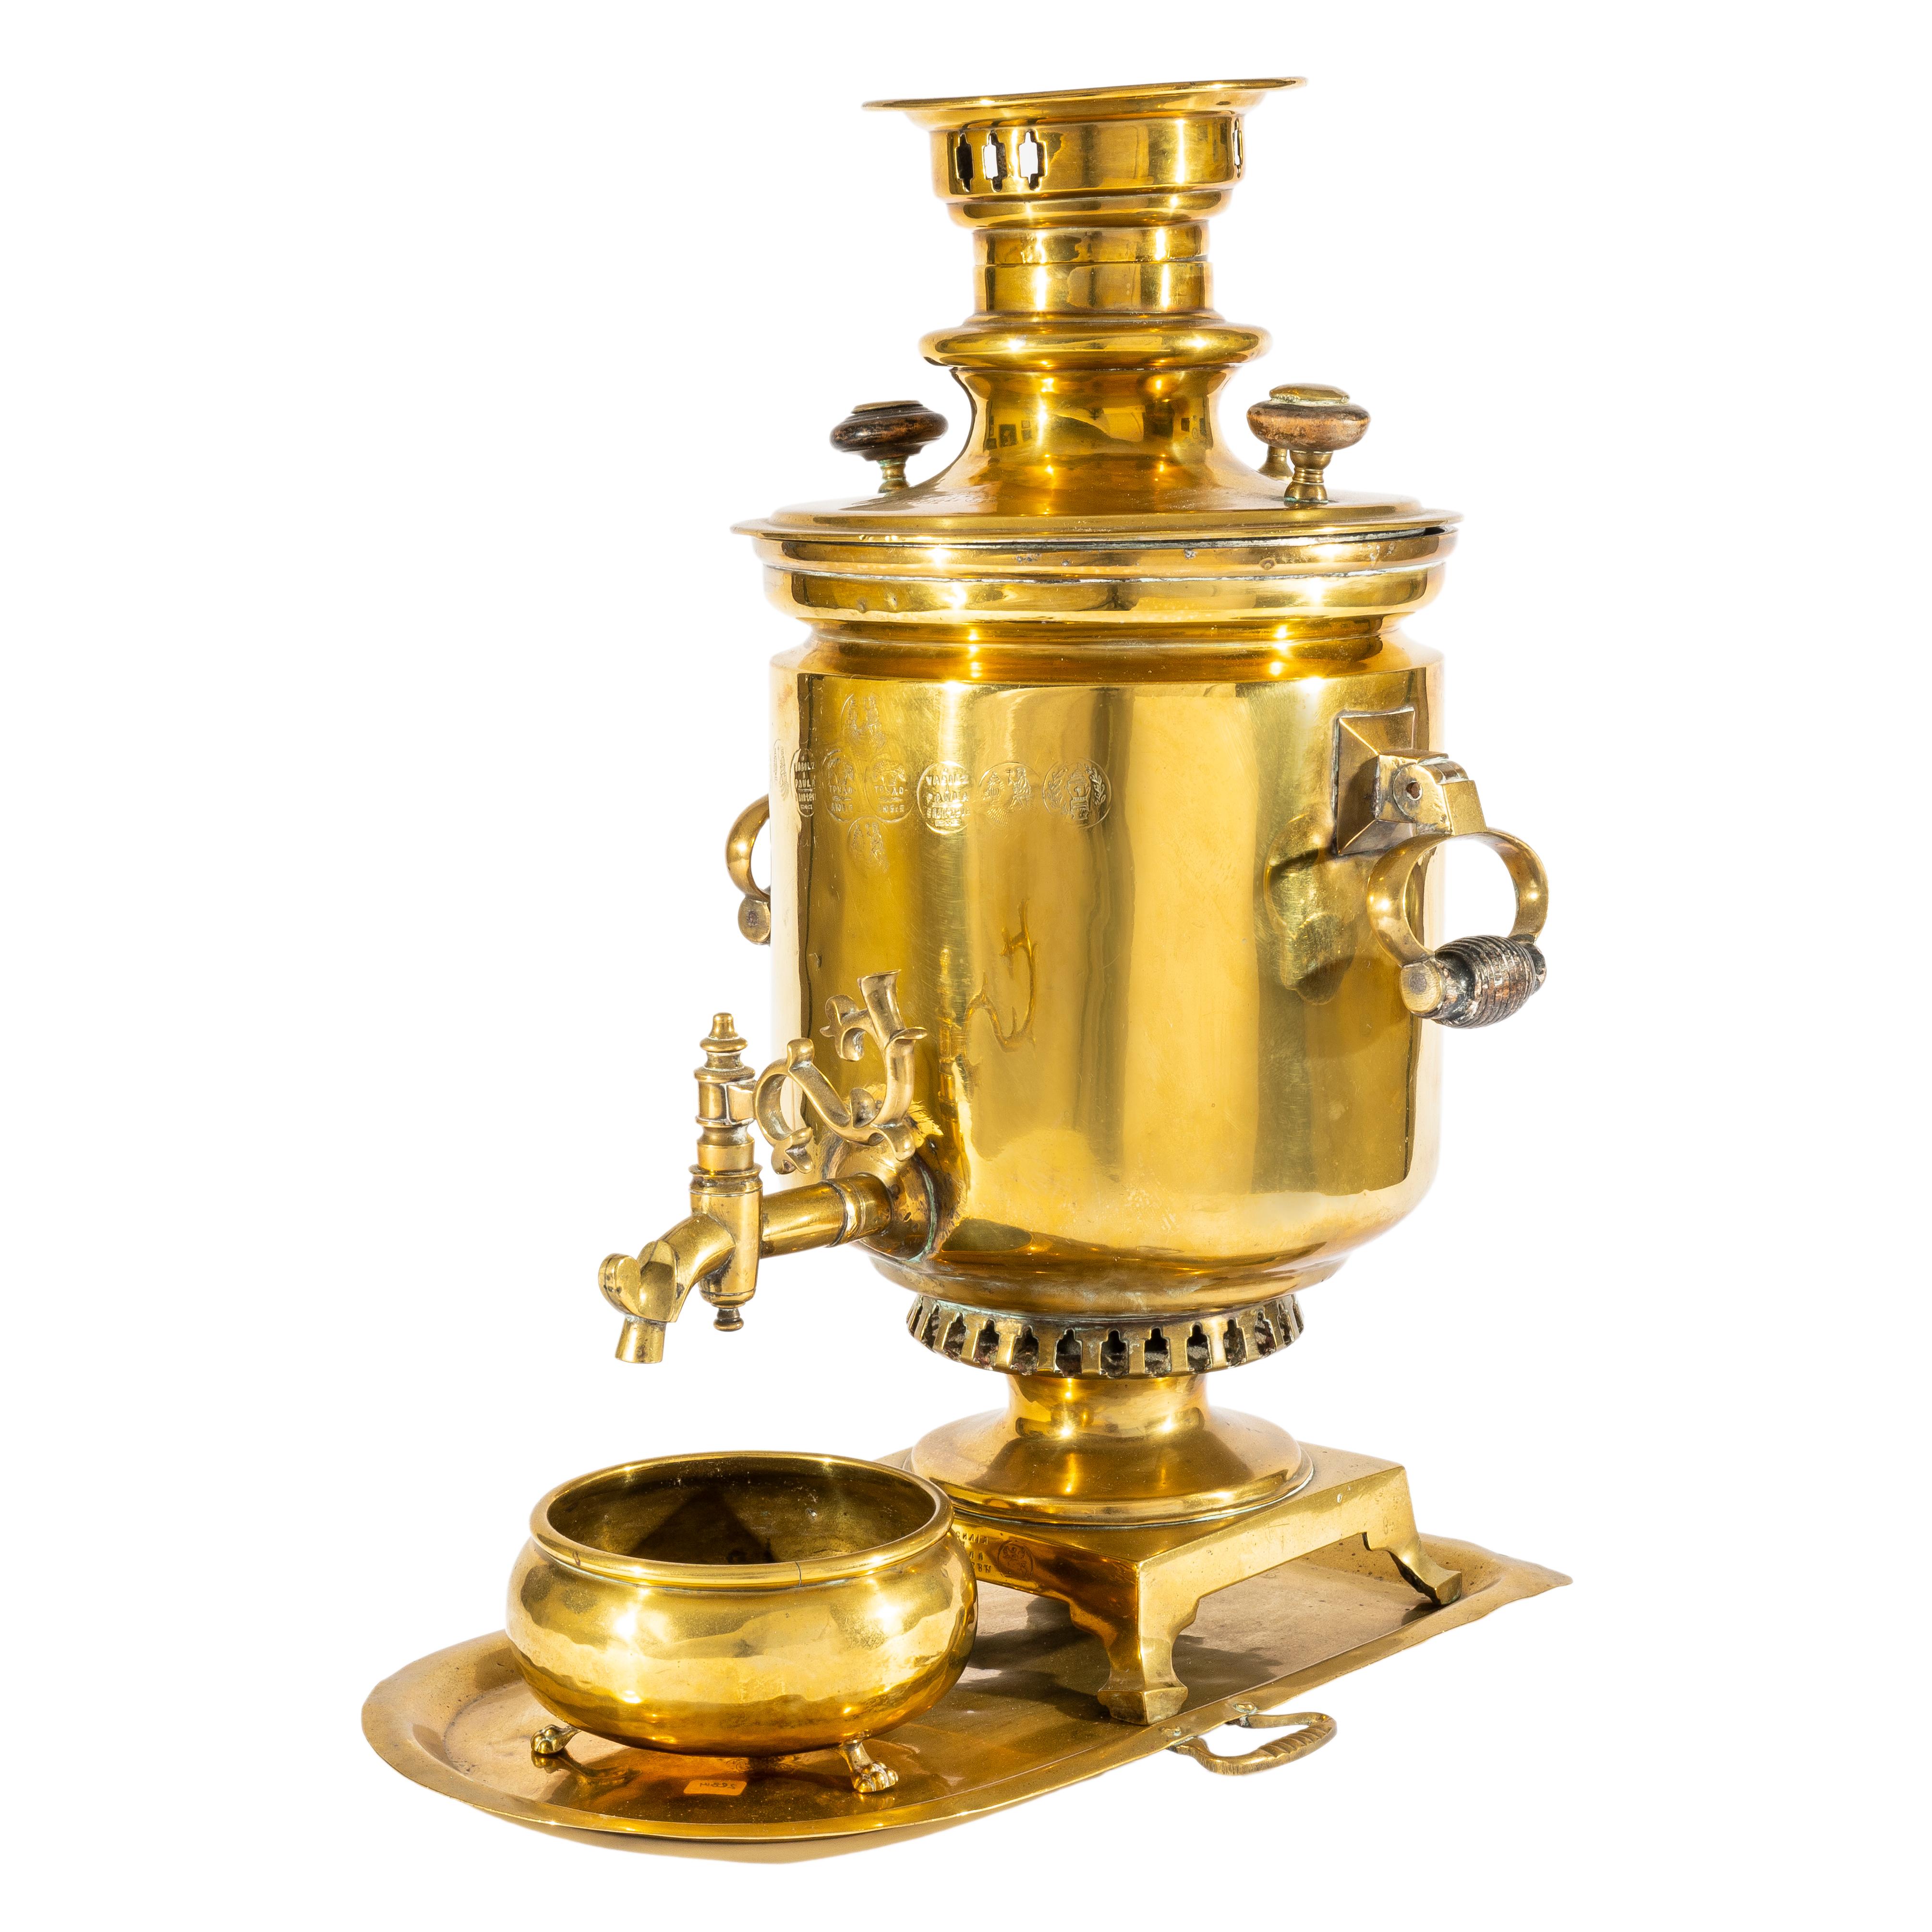 By Tula samovar masters, V.L. Batashev. Of typical form in the Russian imperial style, a classic samovar set tooled in brass comprising a brass samovar, drip bowl and tray. The samovar cylindrical with turned wooden drop handles on a square pedestal